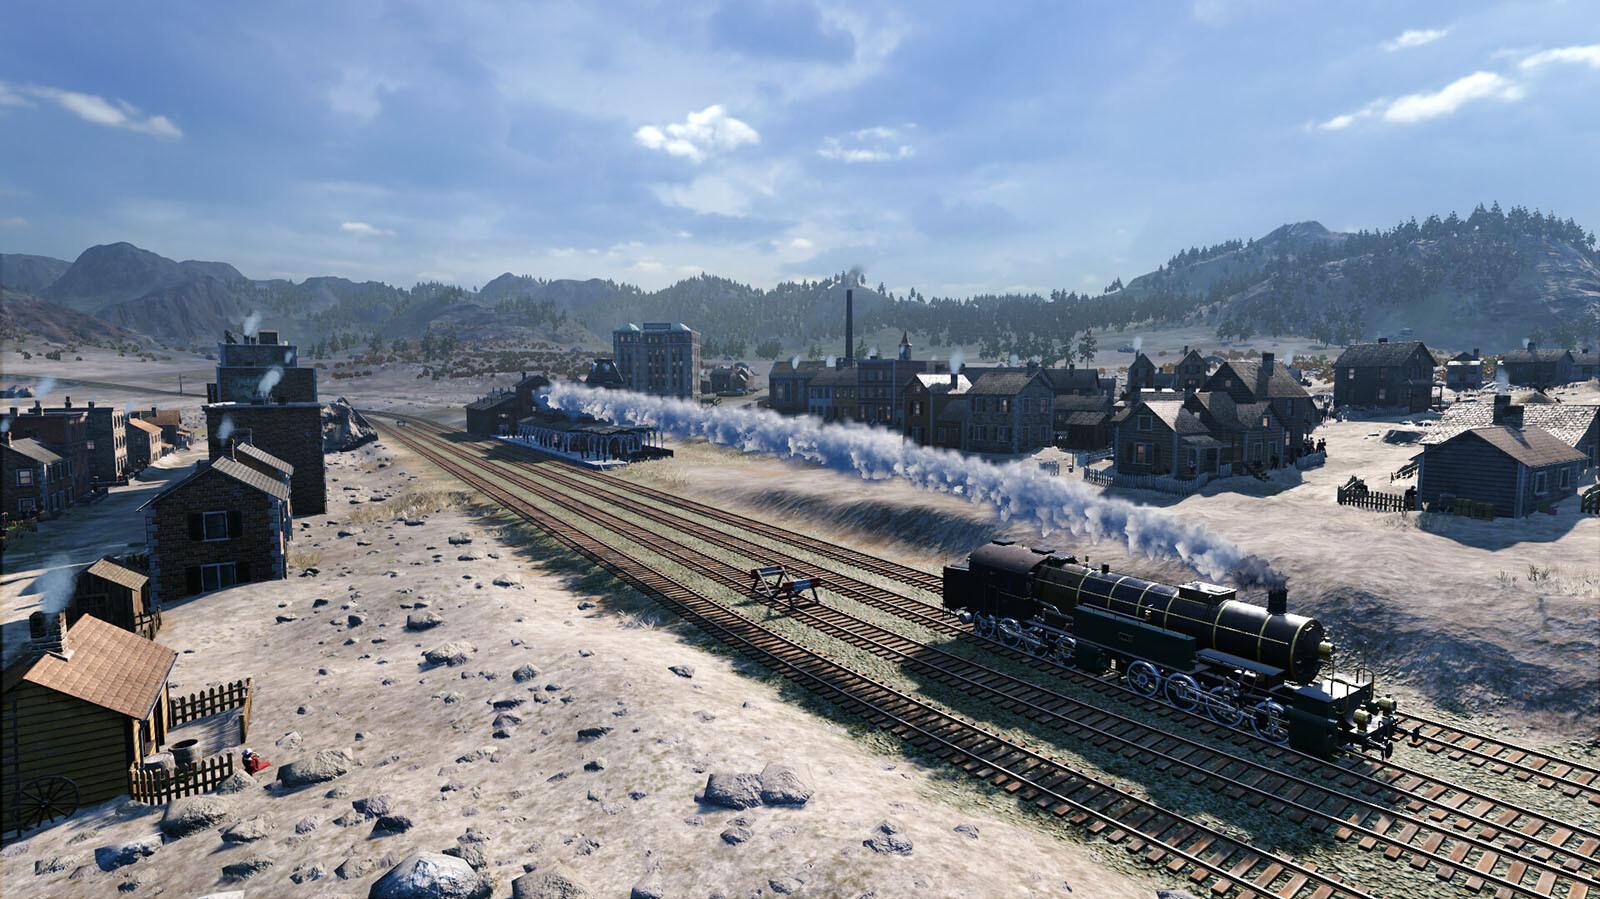 Railway Empire Steam Key For Pc Buy Now